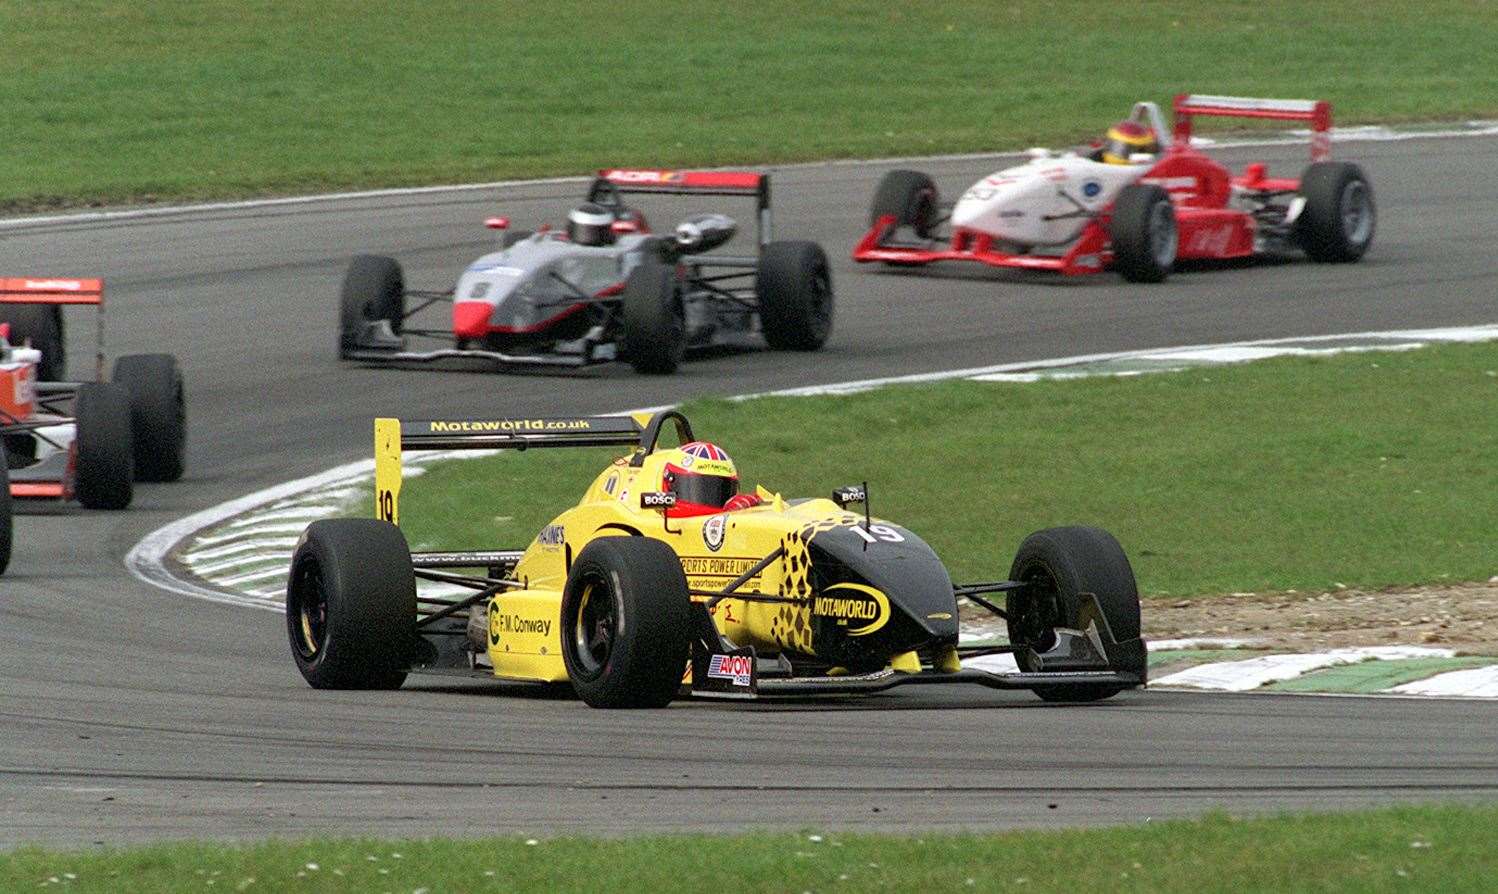 Tom Sisley in British Formula 3 at Brands Hatch in April 2002. He now runs John D Hotchkiss Engineers which is based in West Kingsdown, just a stone's throw from the circuit